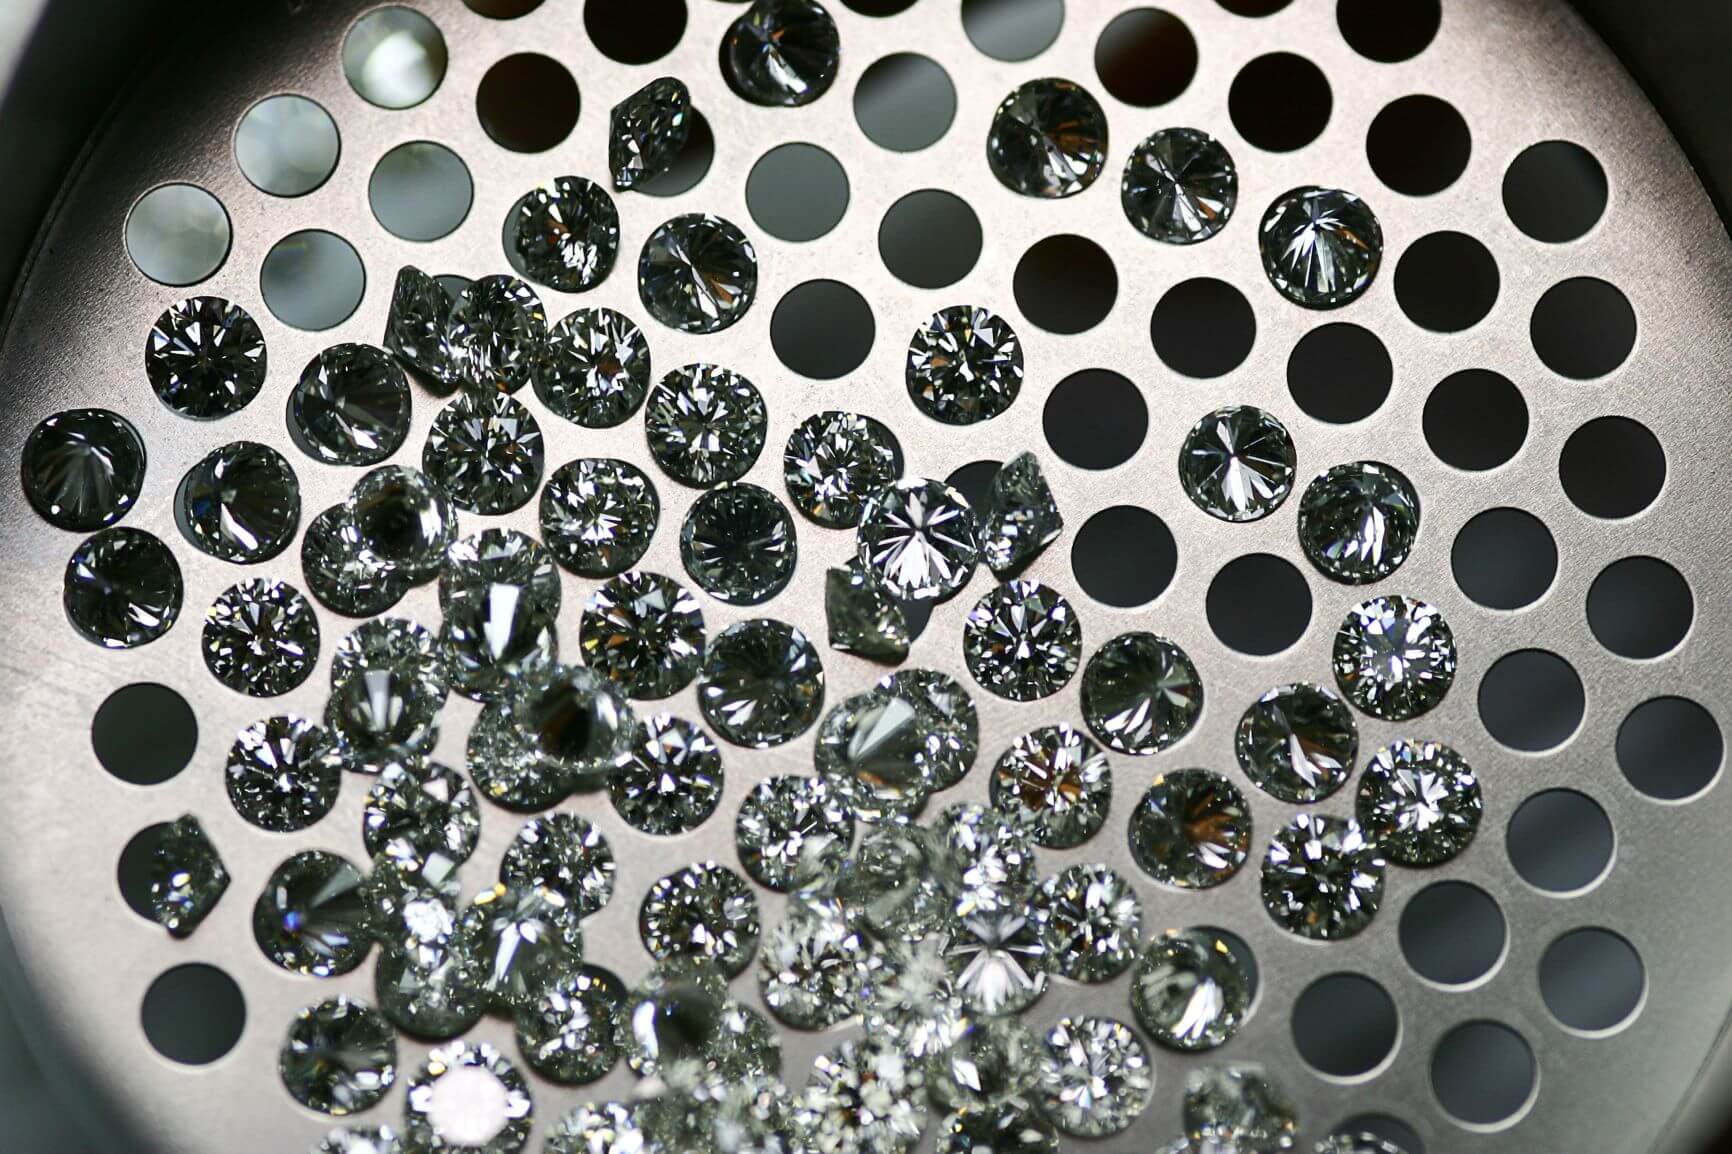 Calibrated diamonds through the sieve. A working tool for measuring the size of your diamond